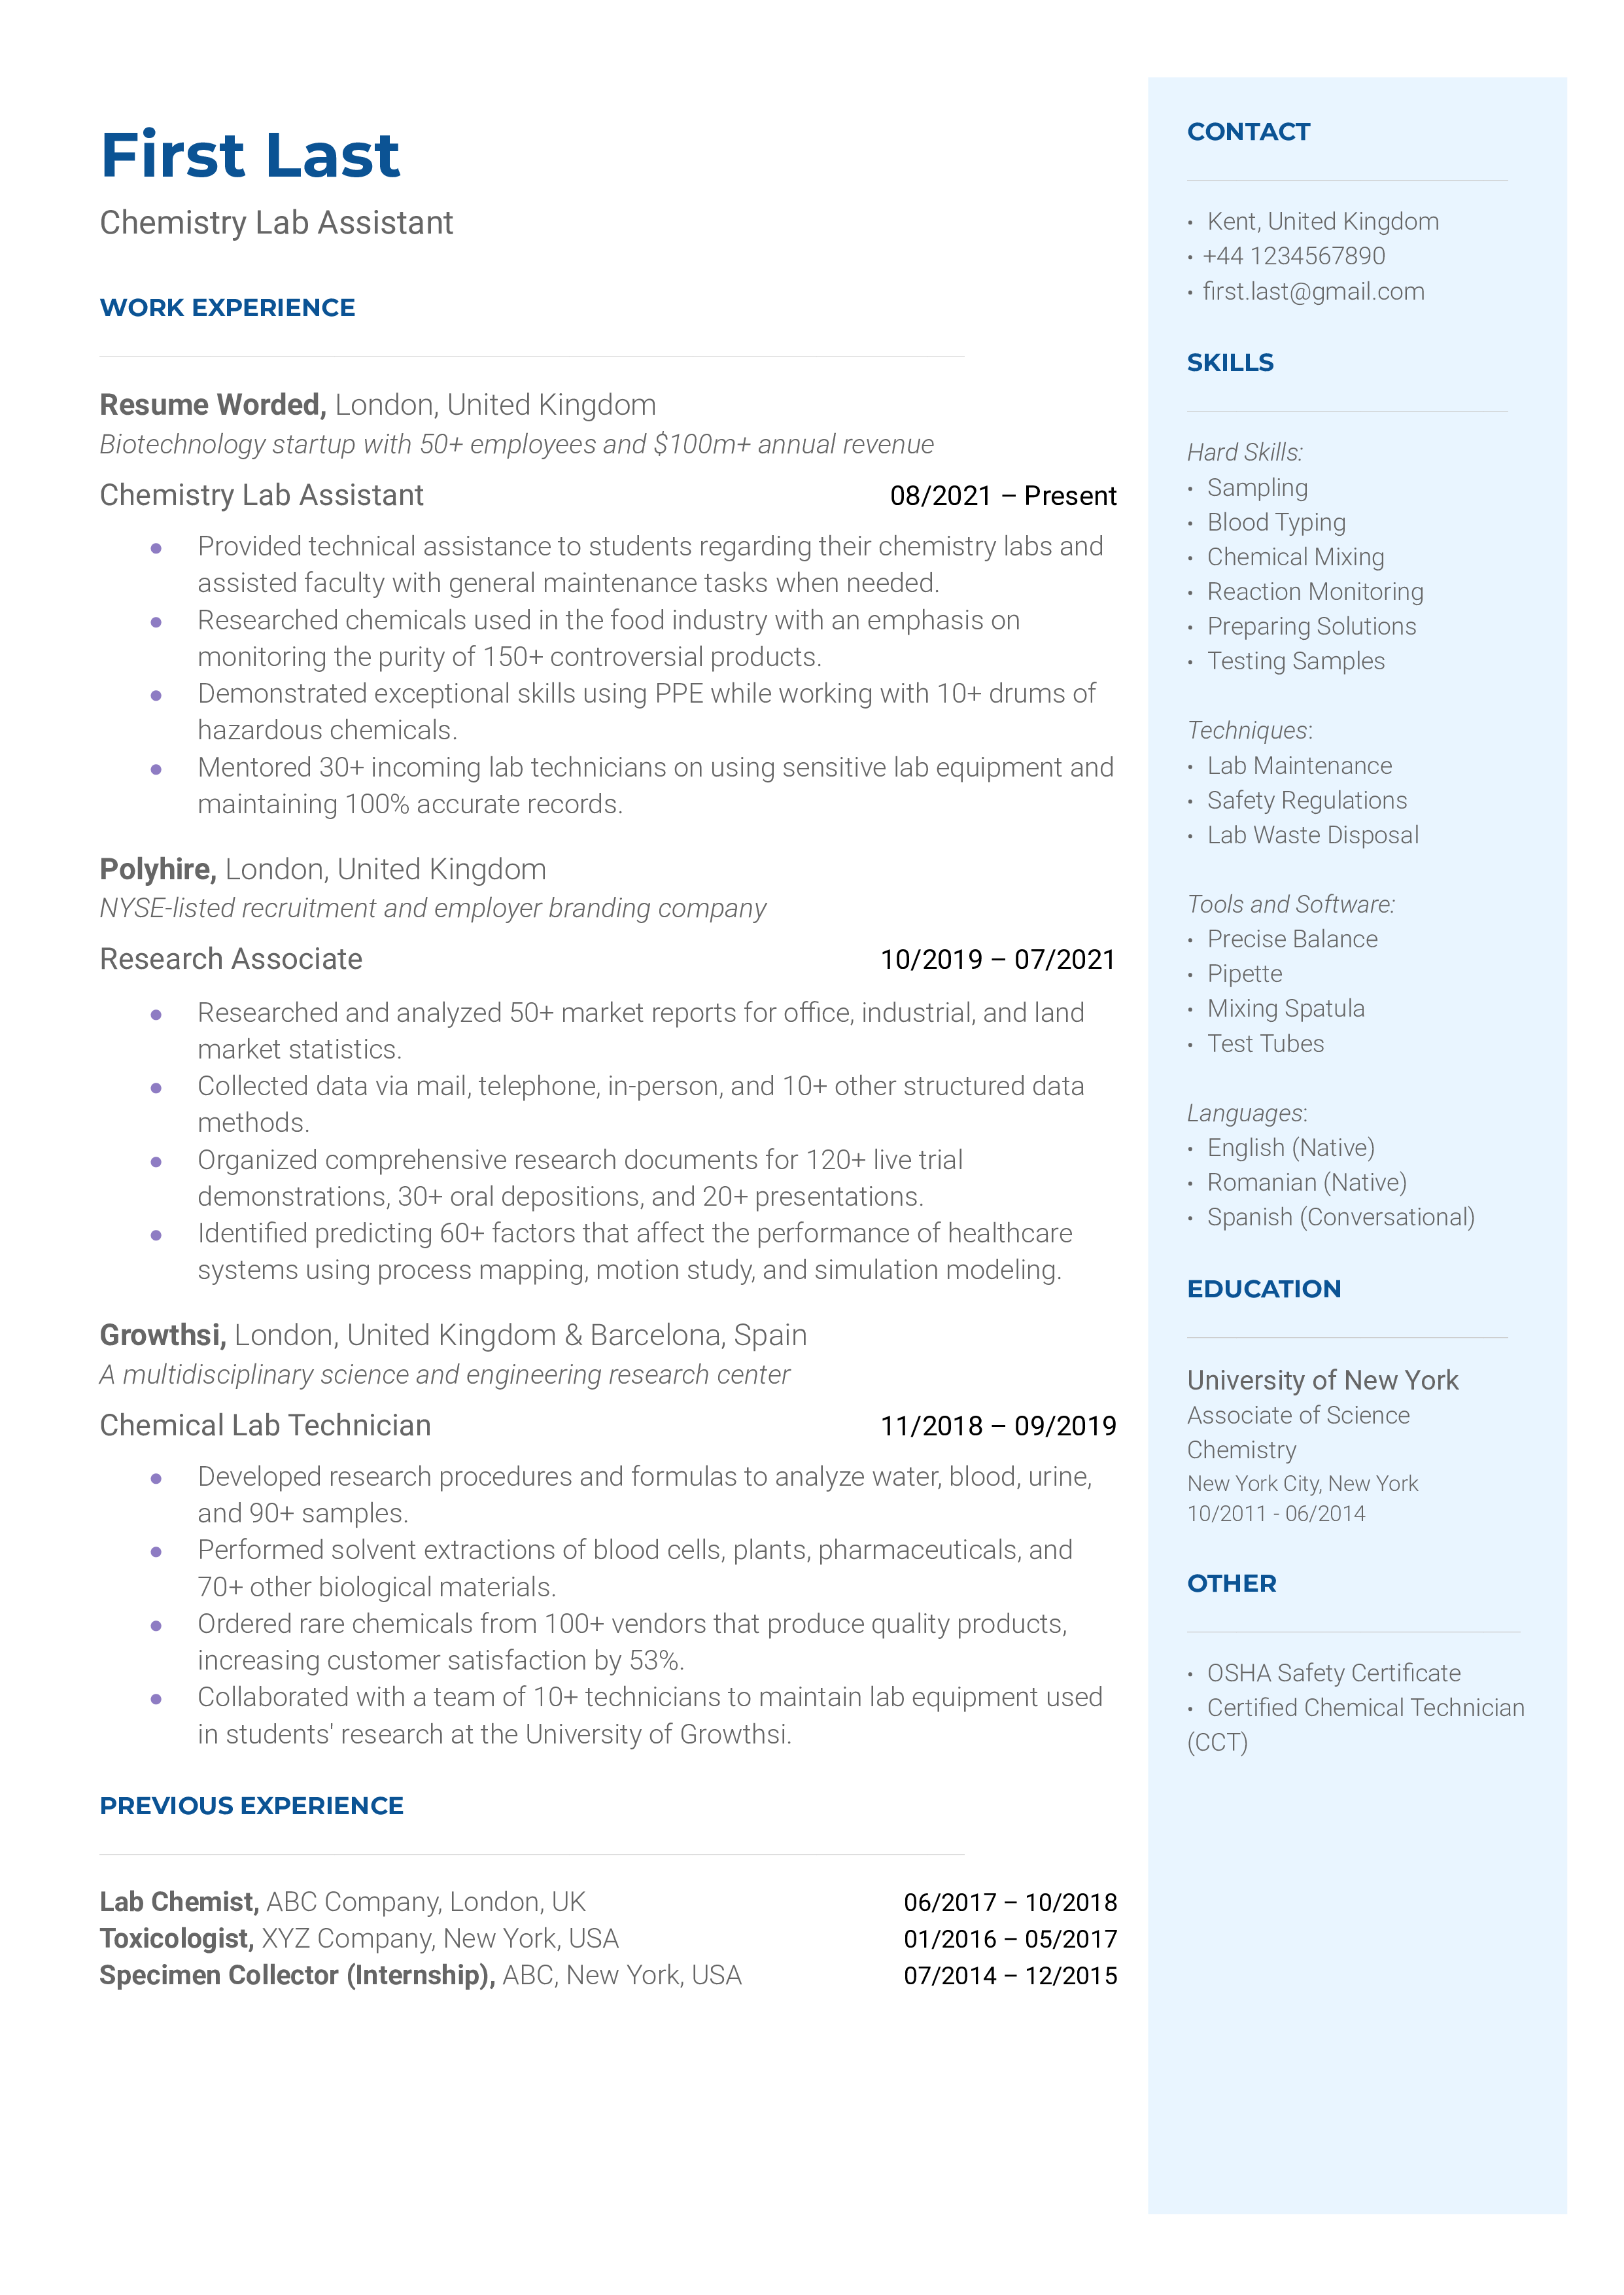 A resume for a chemistry lab assistant with a degree in chemistry and experience as a volunteer laboratory assistant.